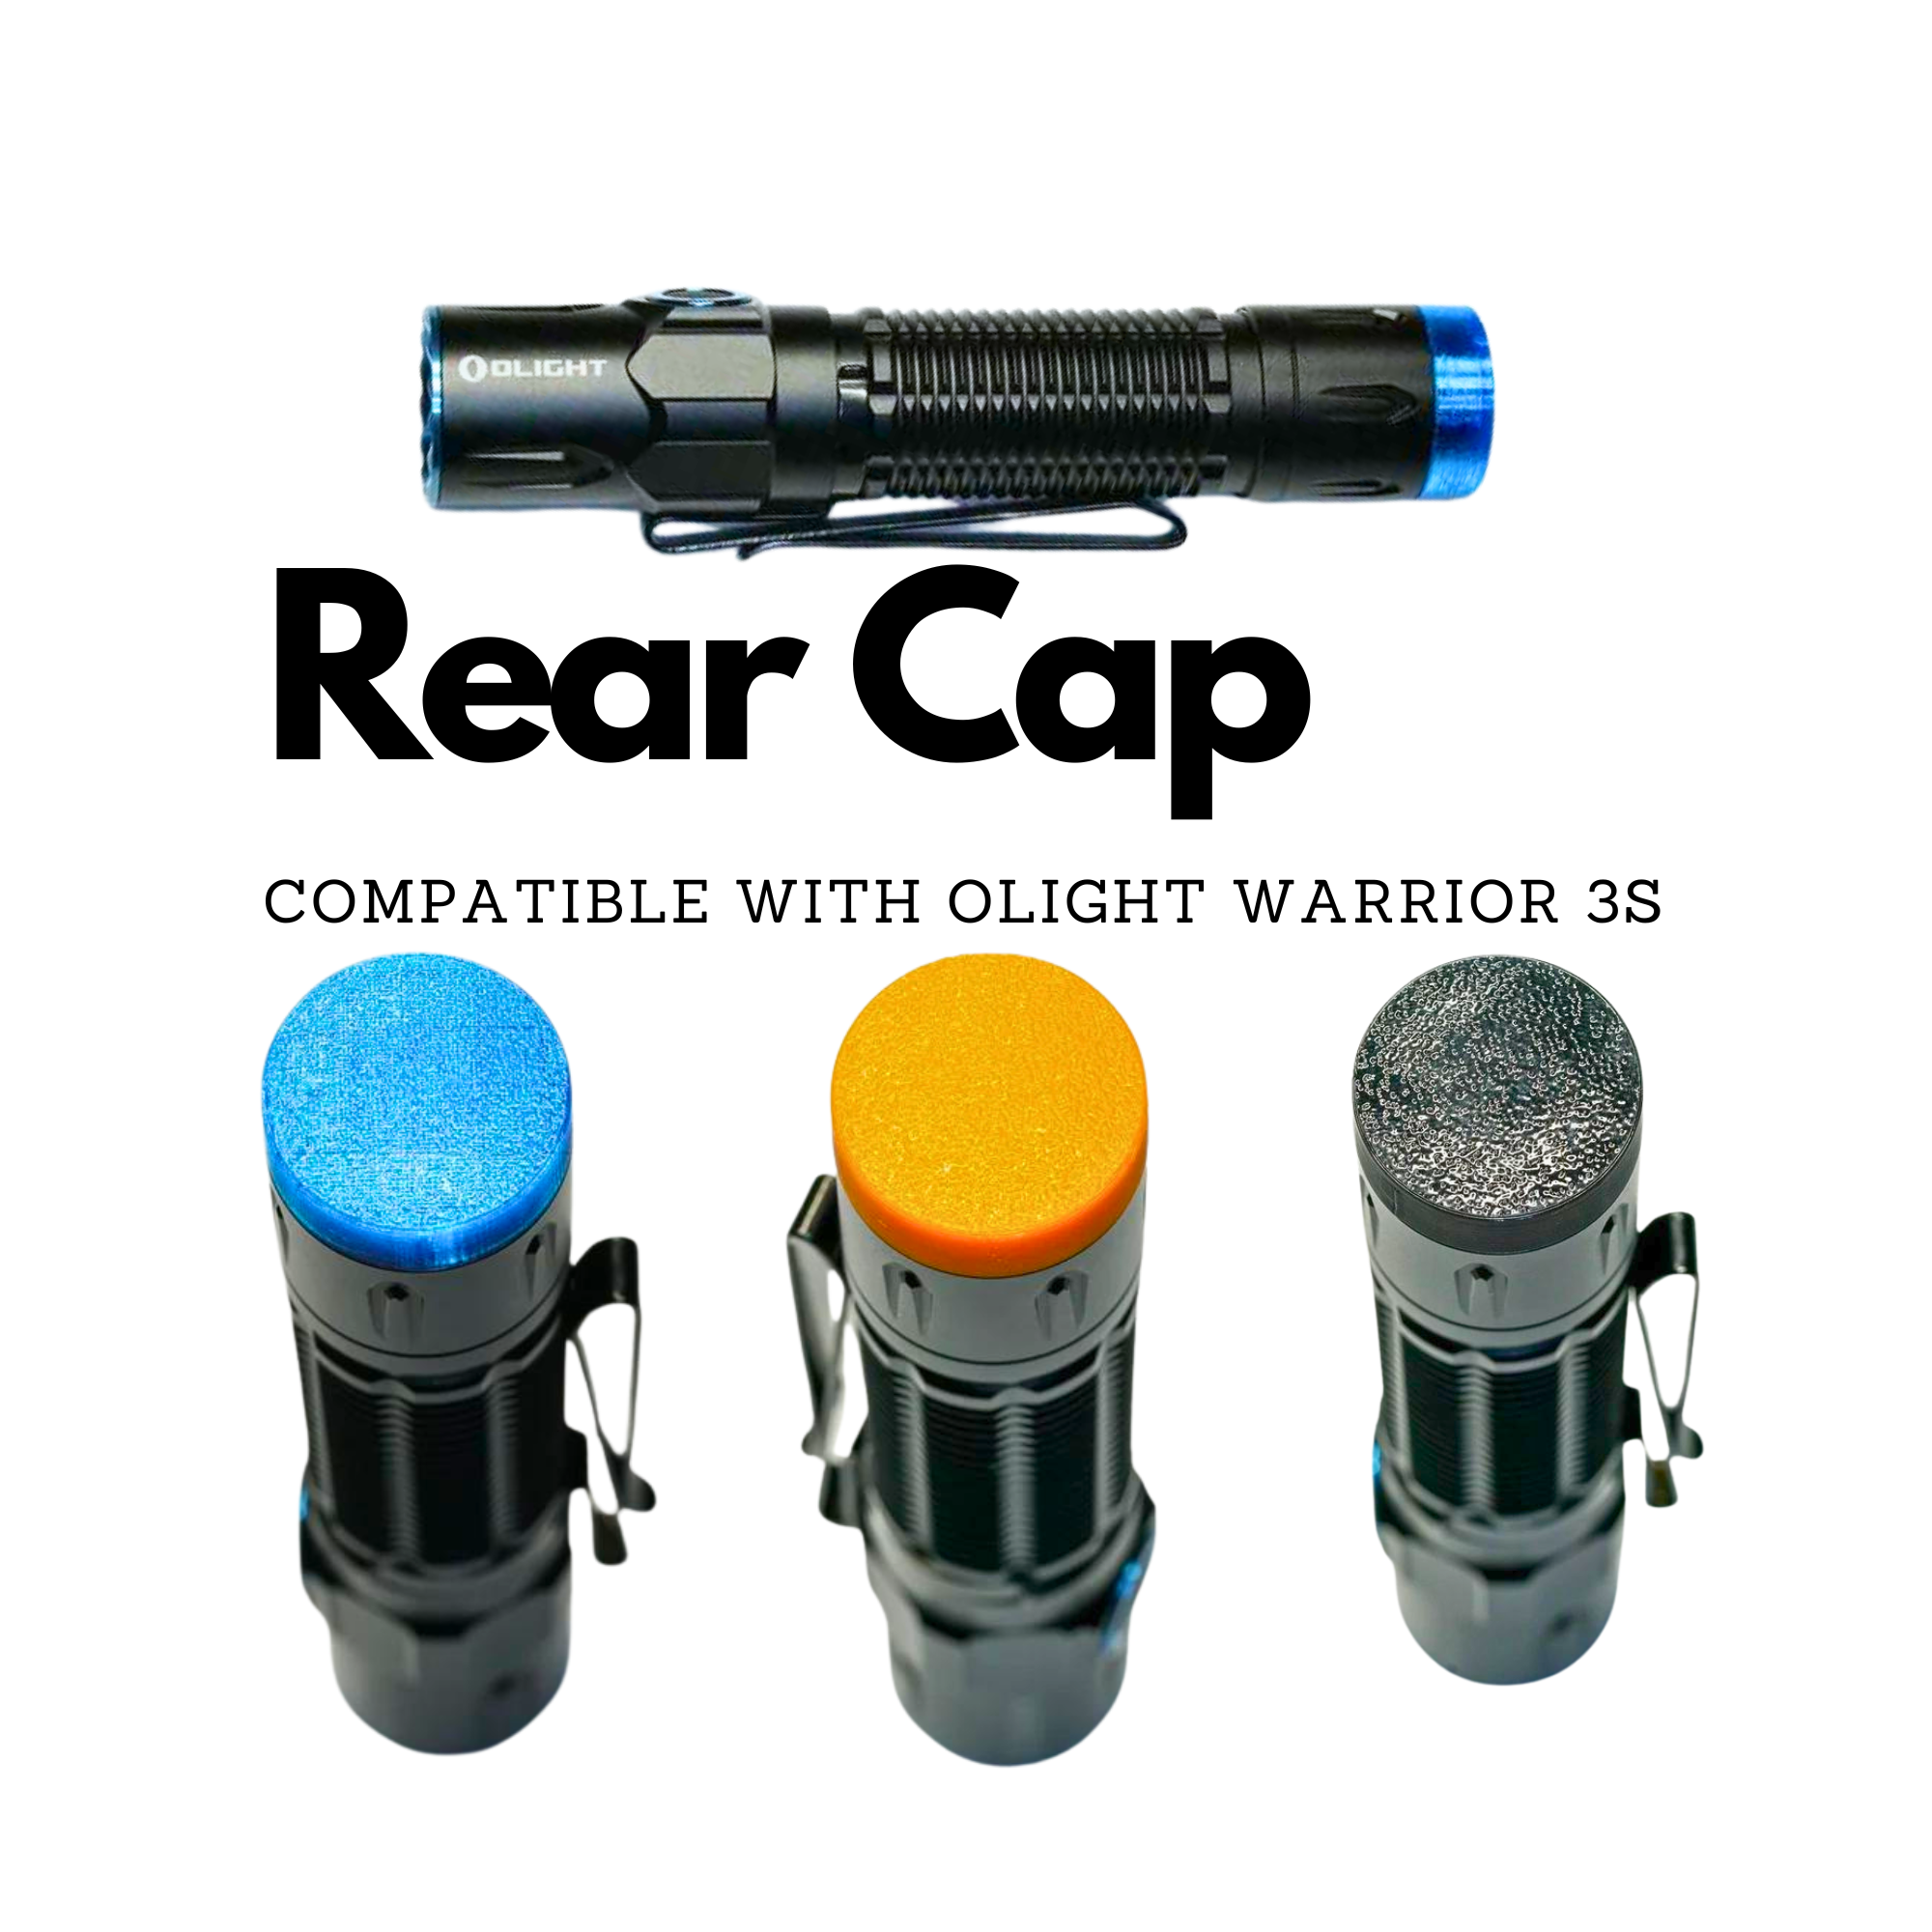 Rear Cap compatible with Olight Warrior 3S